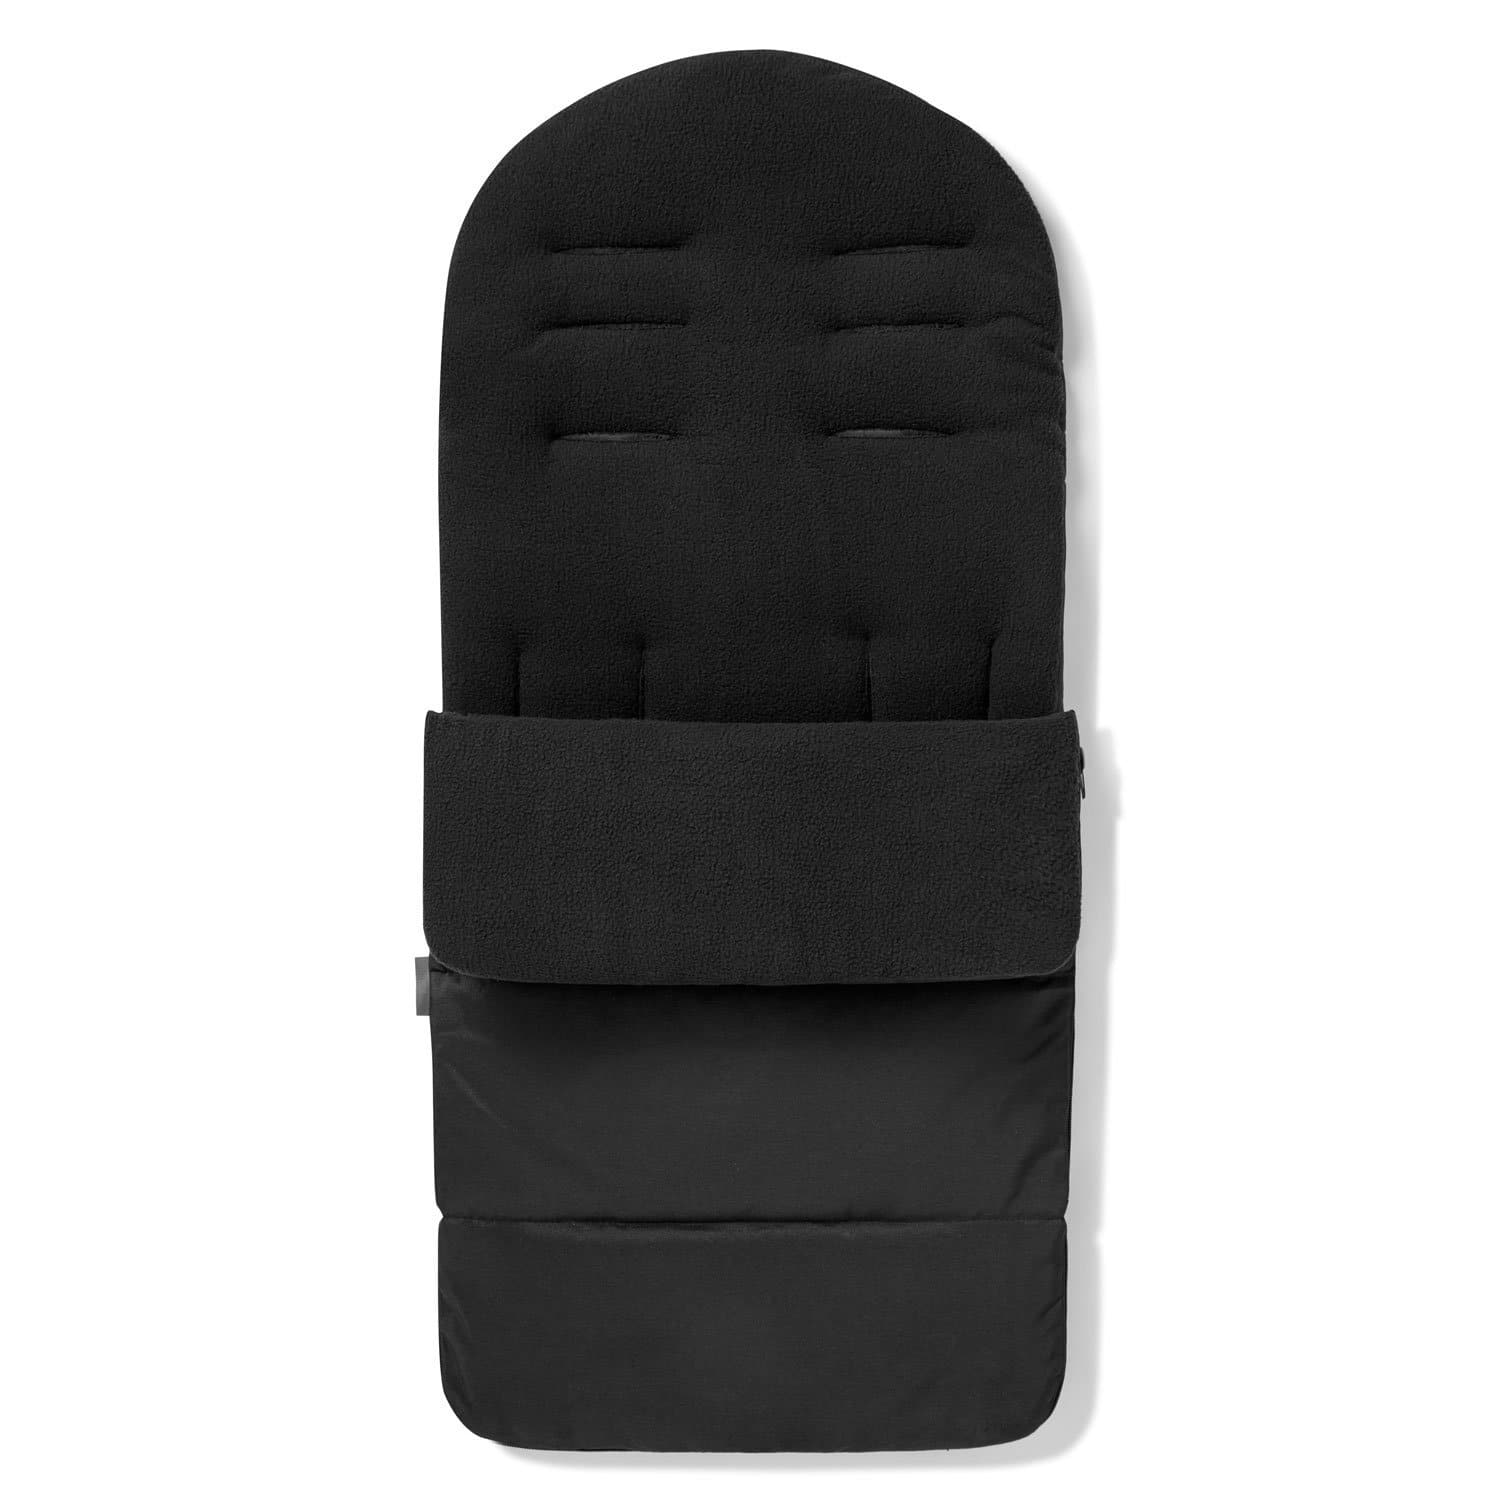 Premium Footmuff / Cosy Toes Compatible with Kiddicare - Black Jack / Fits All Models | For Your Little One